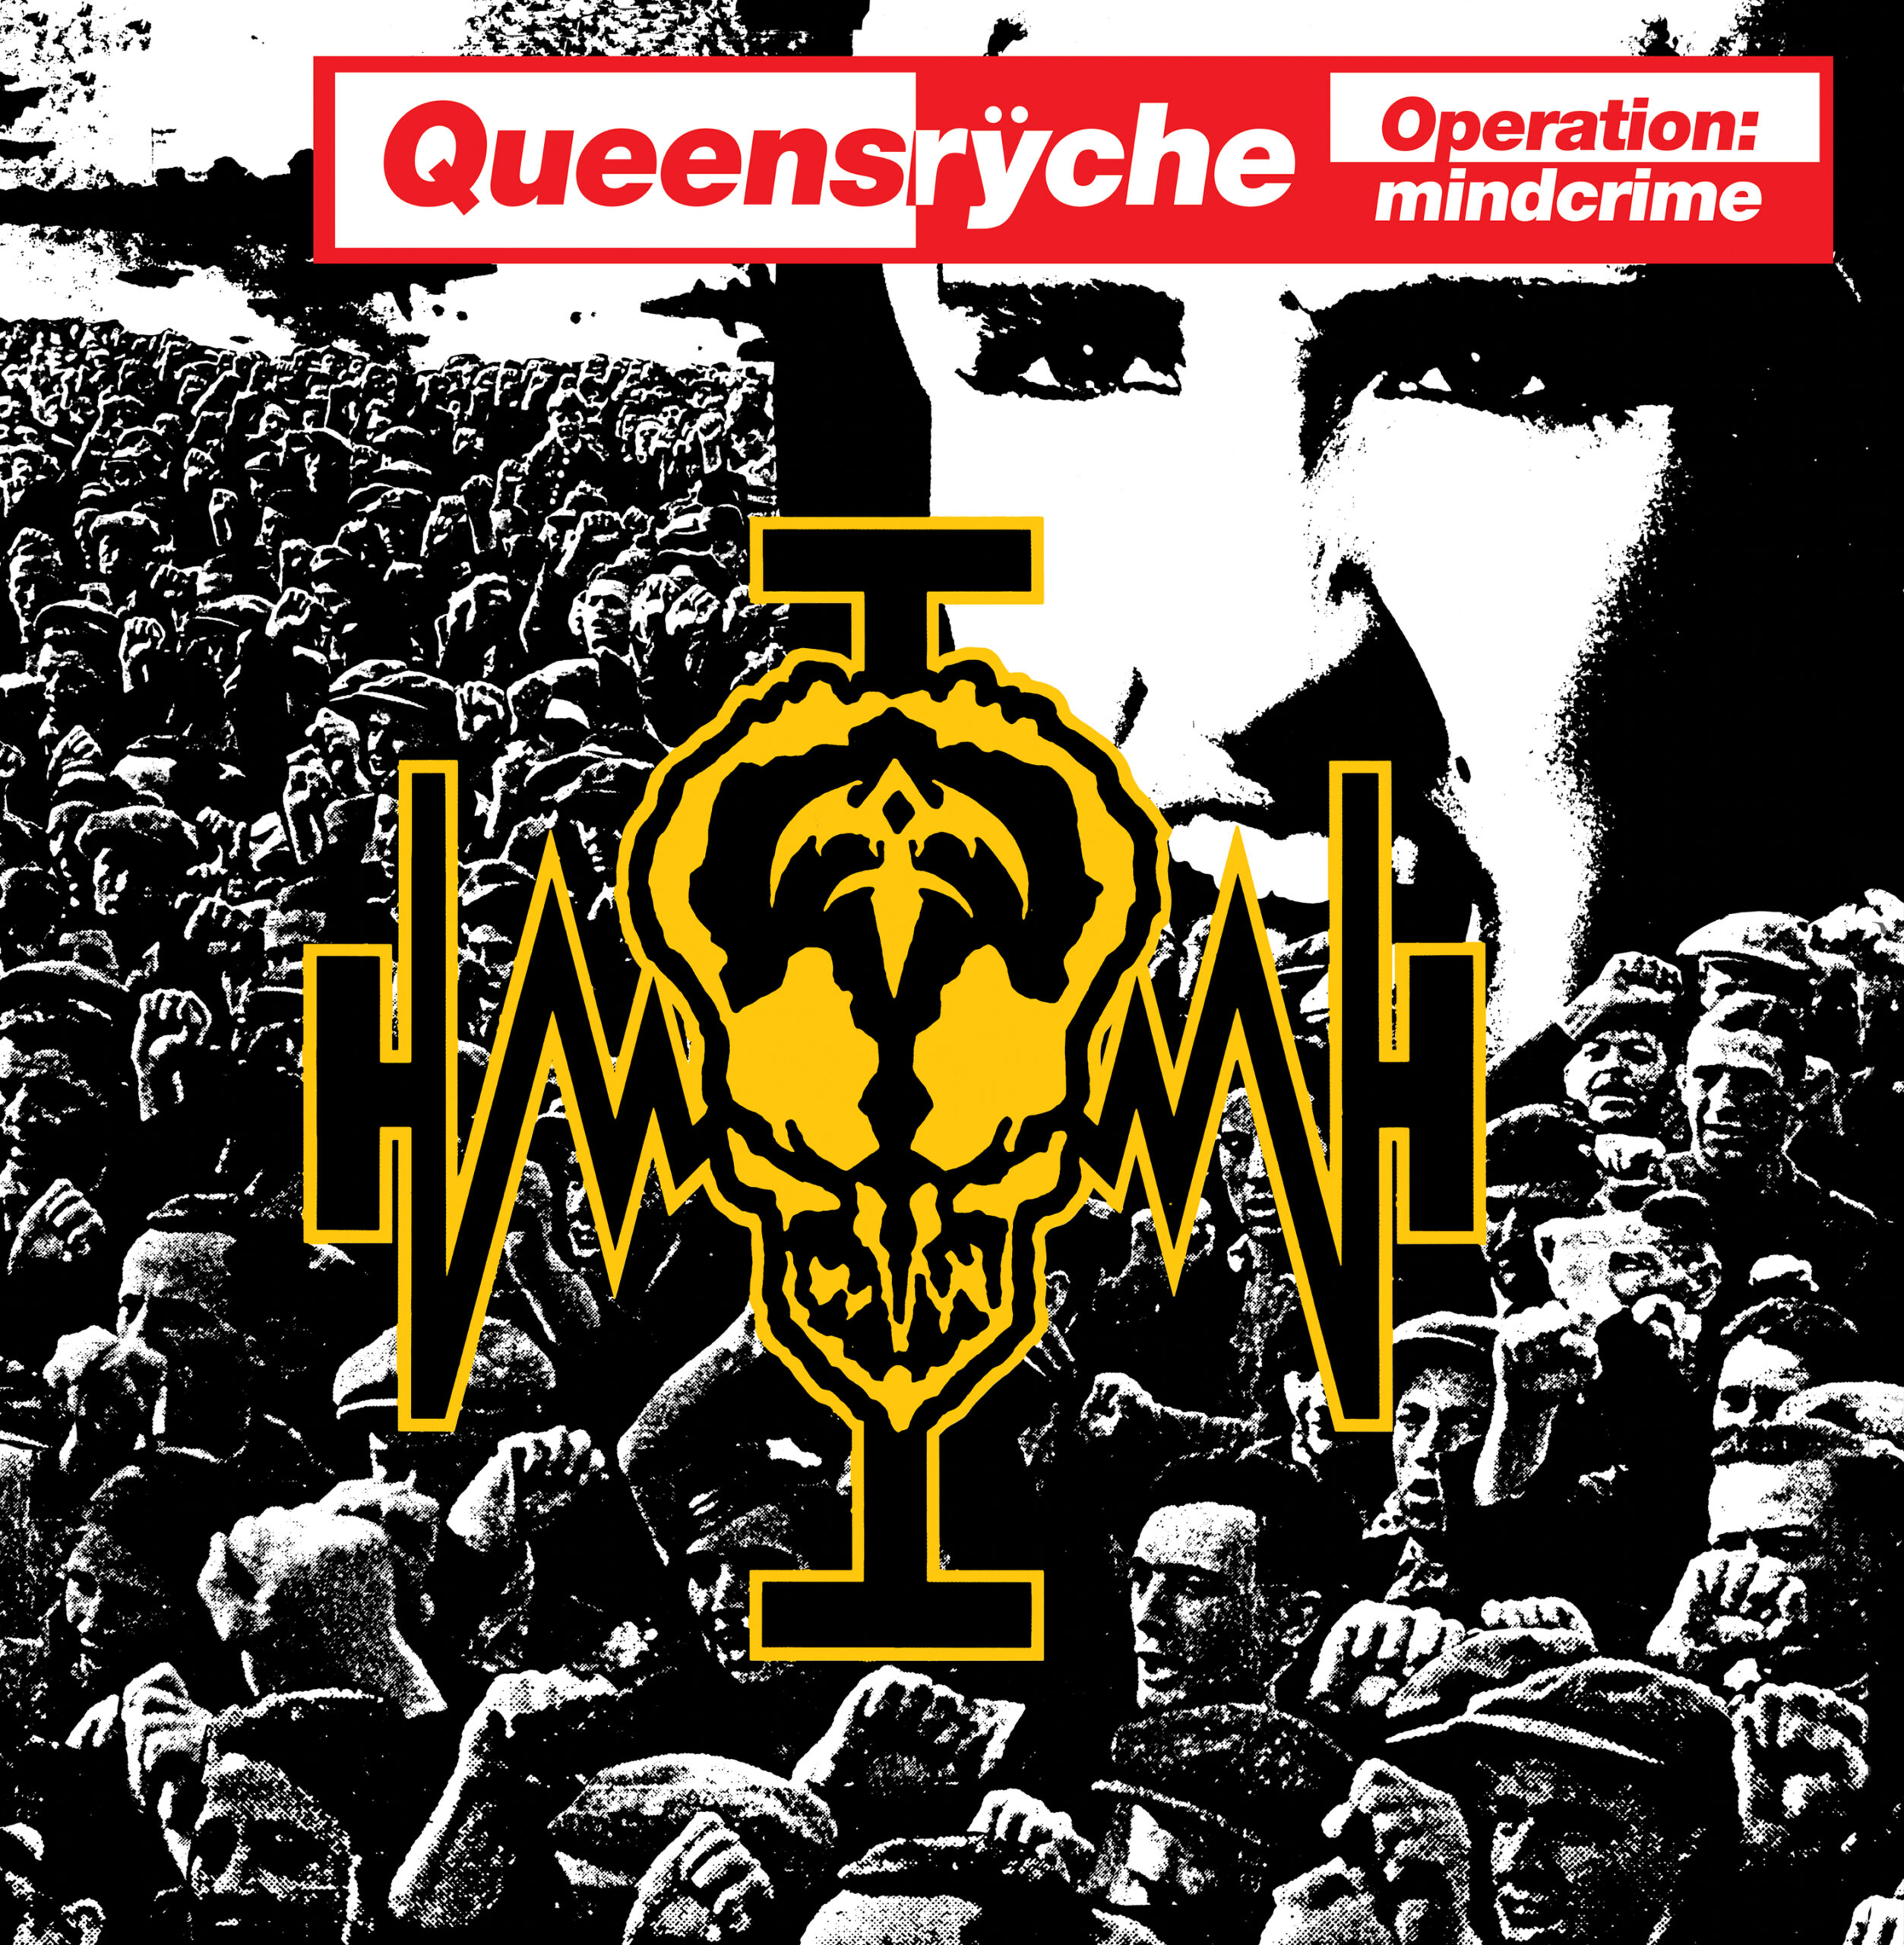 Queensryche (USA) – Operation: Mindcrime & Empire (Reissues)